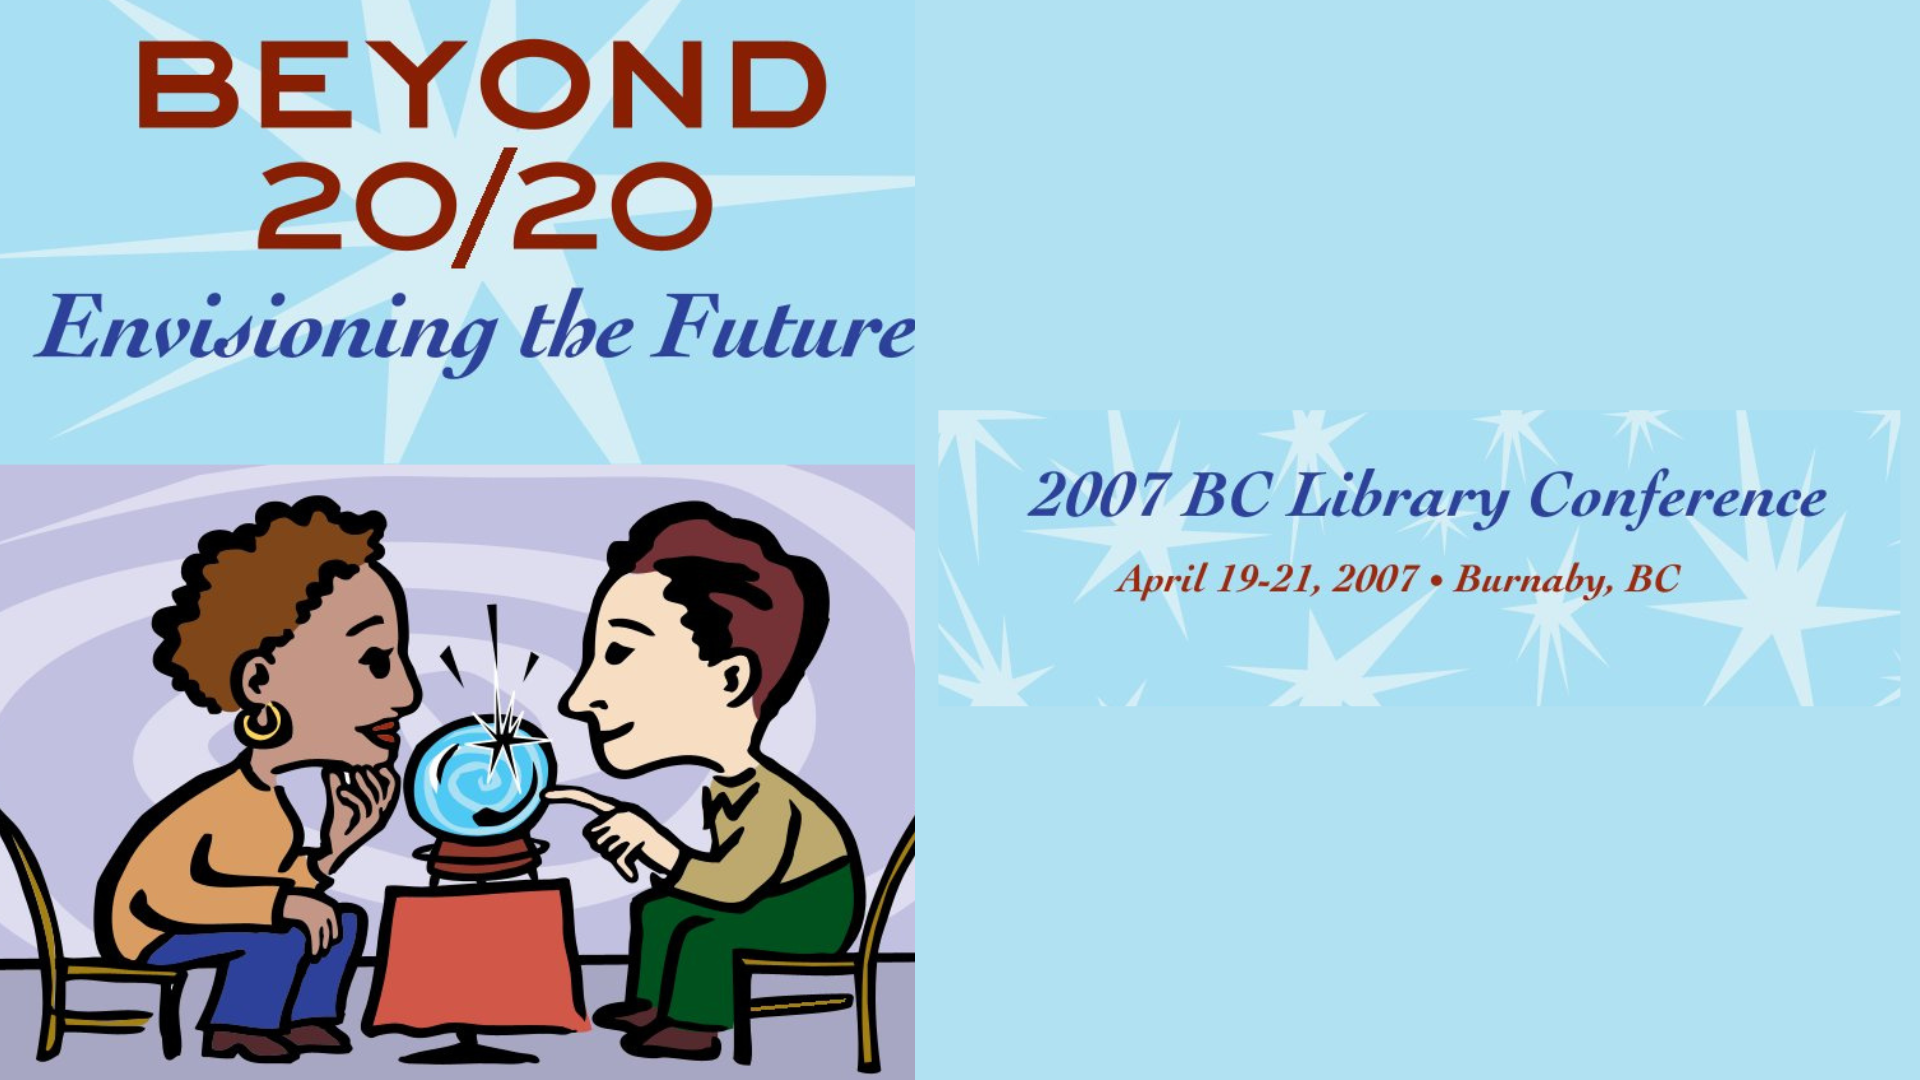 Graphic with text "Beyond 20/20 Envisioning the Future 2007 BC Library Conference April 19-21,2007 Burnaby, BC"